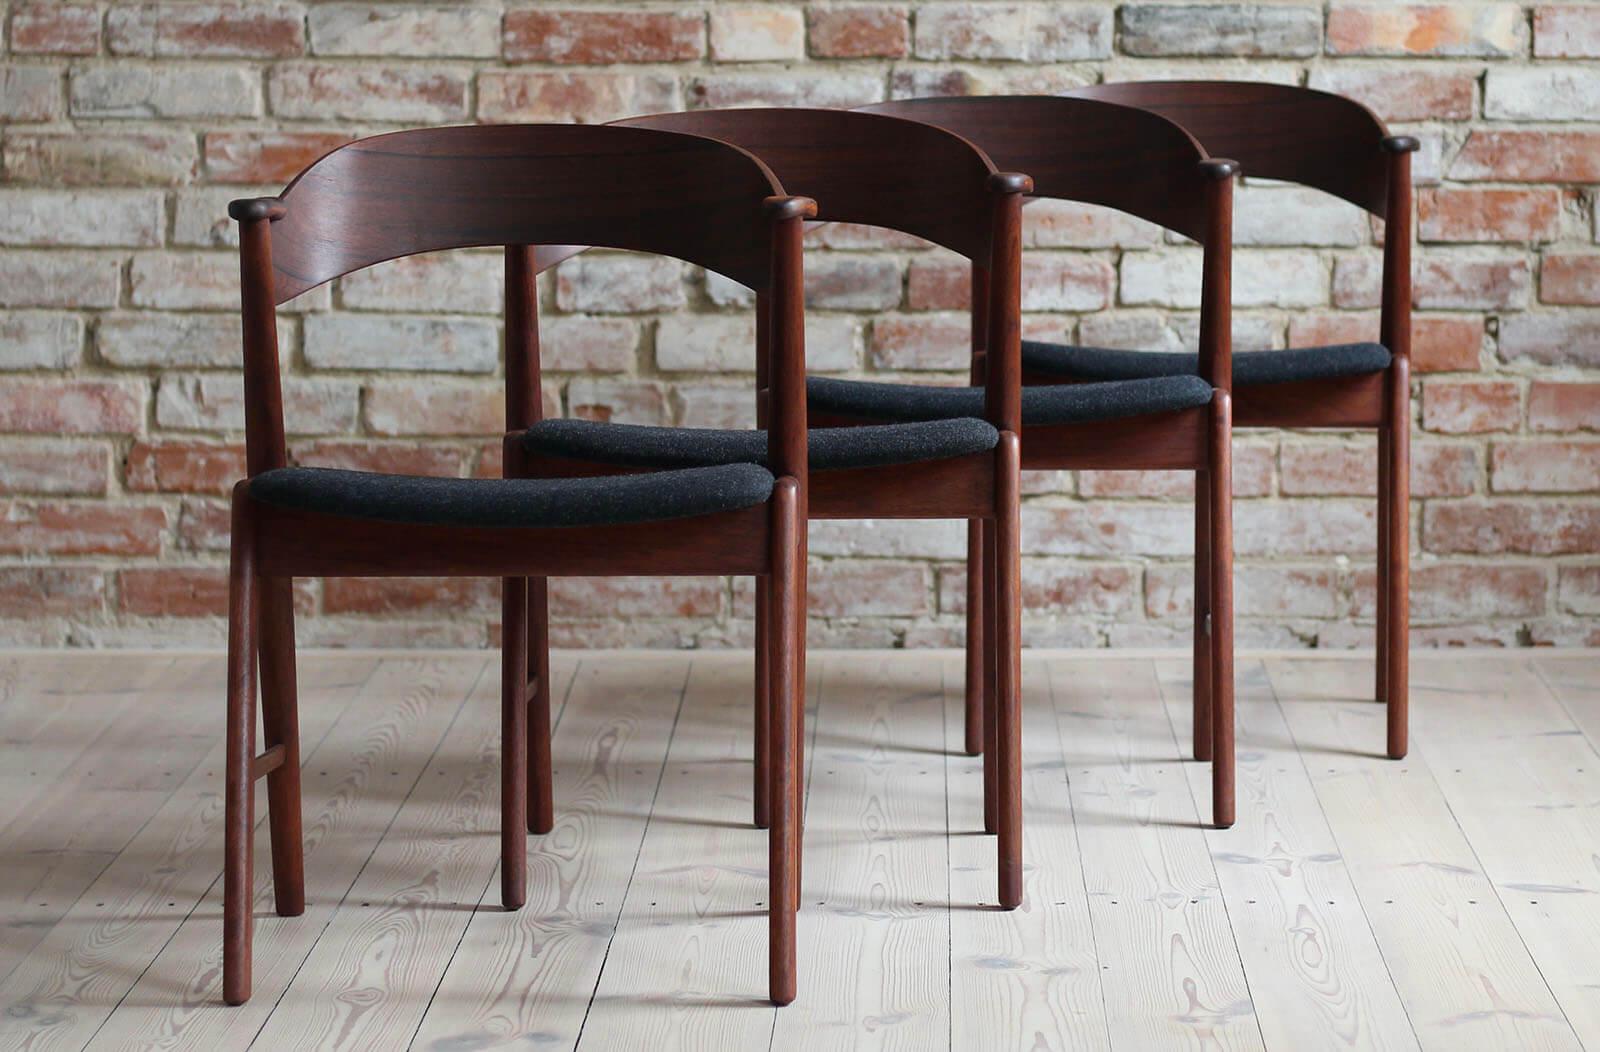 Scandinavian Set of 4 Dining Chairs in Kai Kristiansen Style, 1960s, Fully Renovated